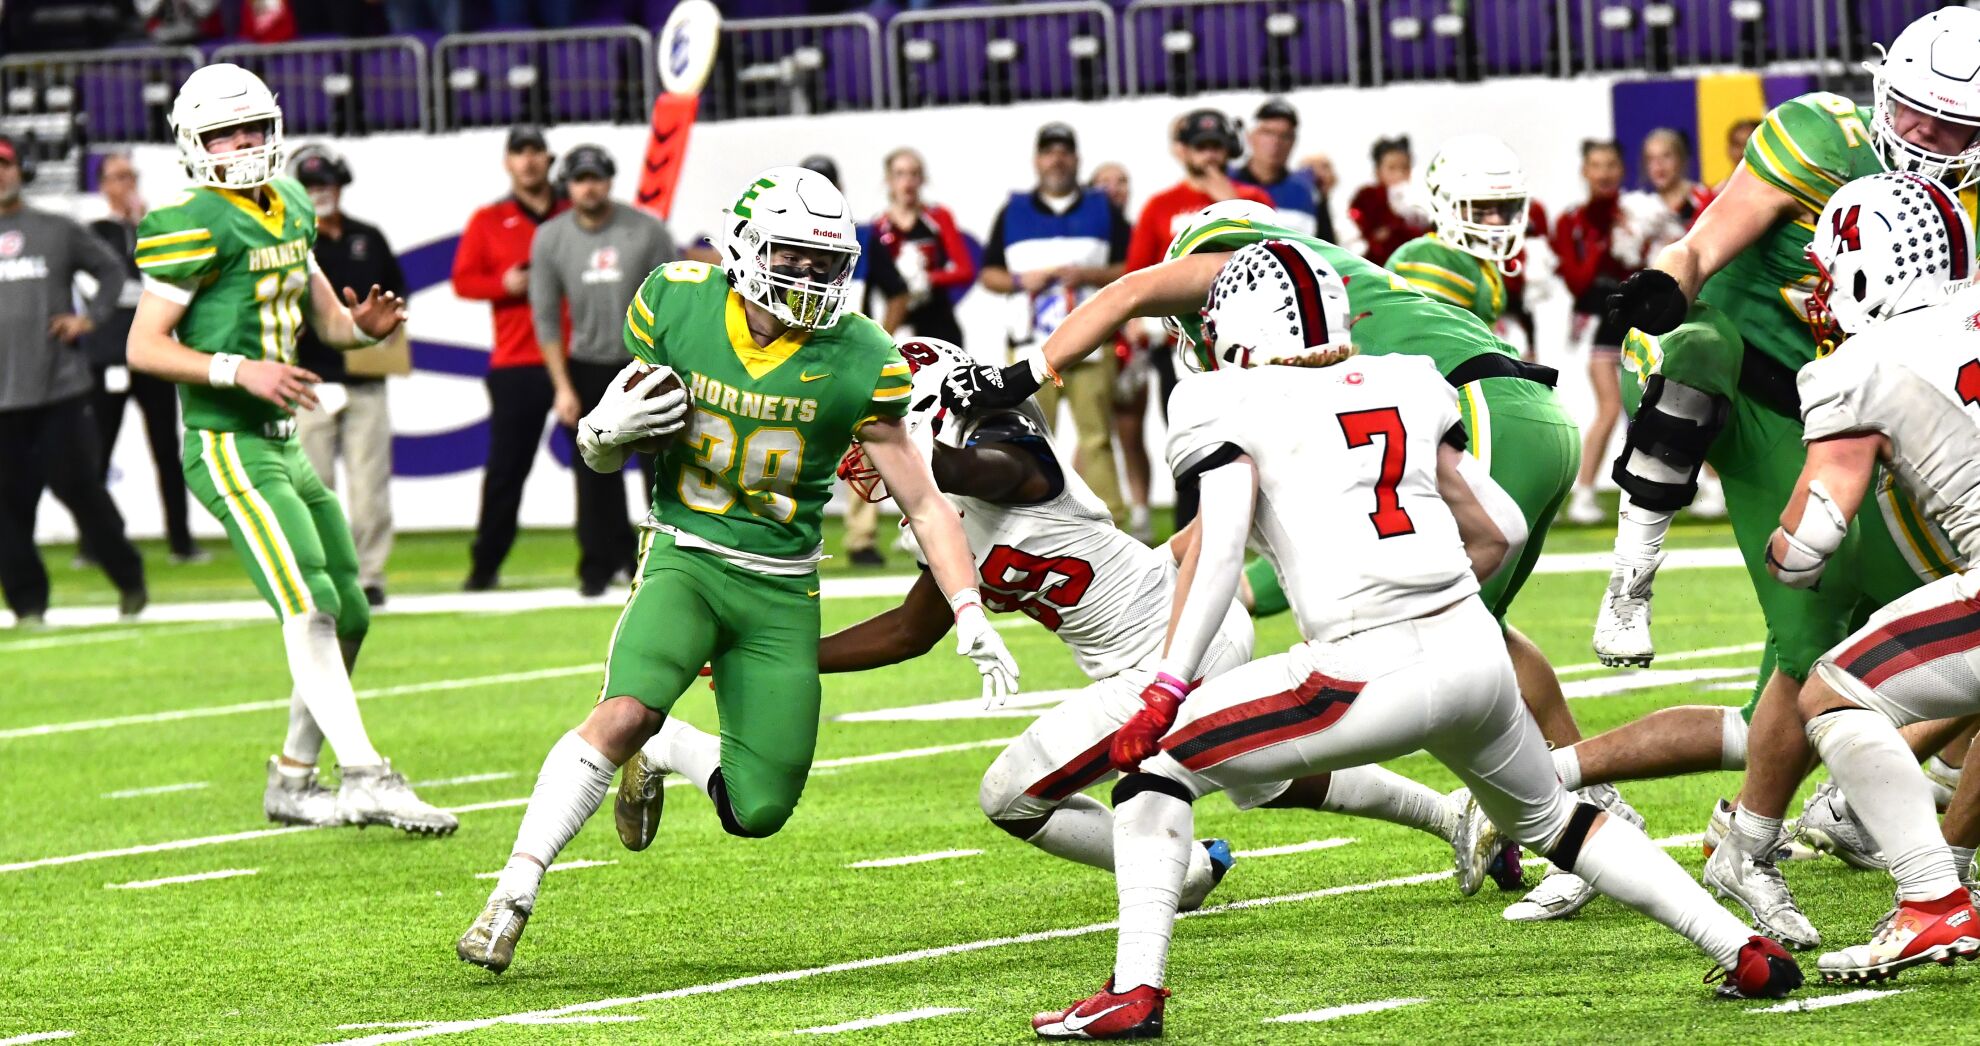 Edina short ‘an inch or two’ in bid for Prep Bowl title